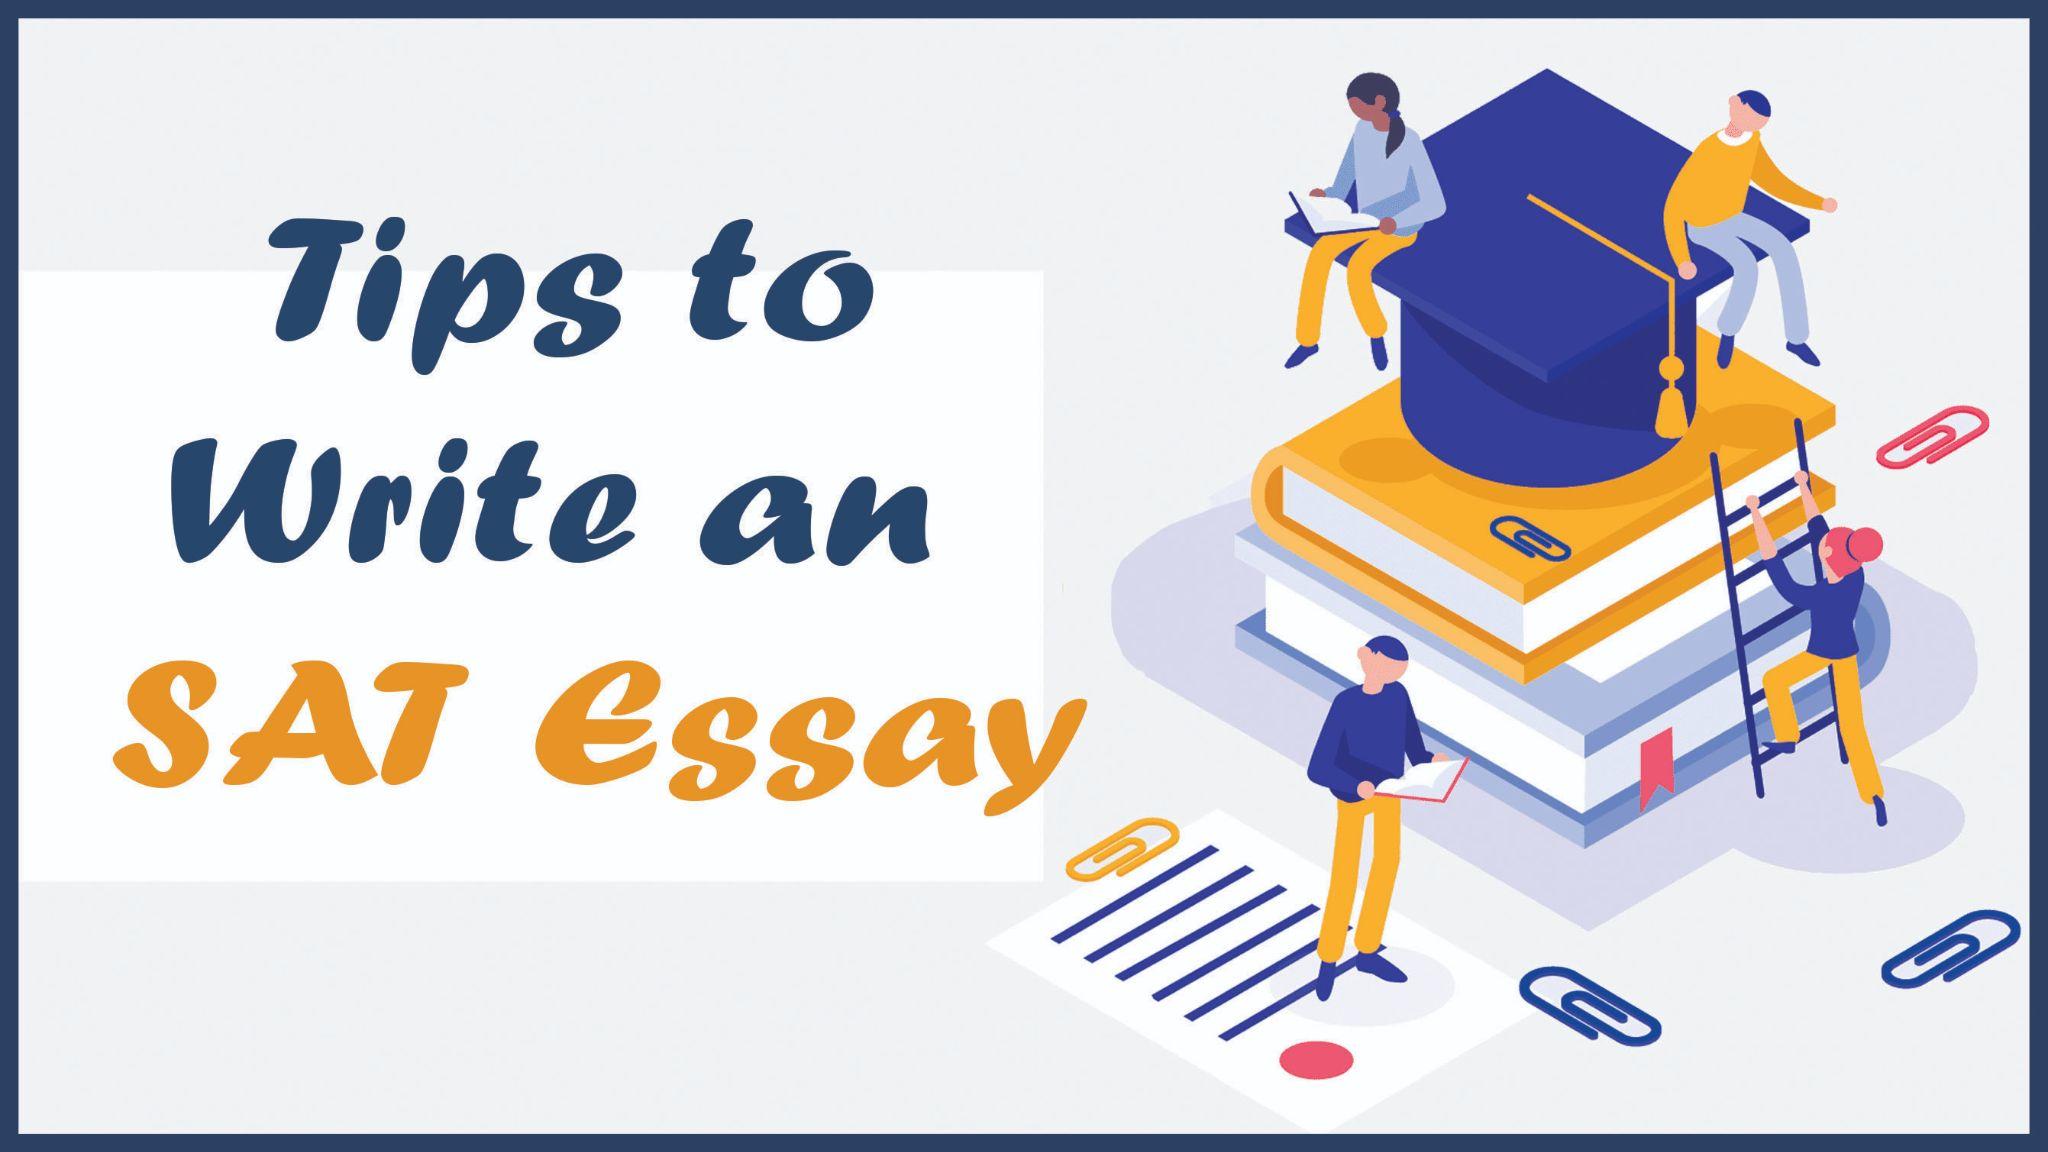 how to write sat essay step by step